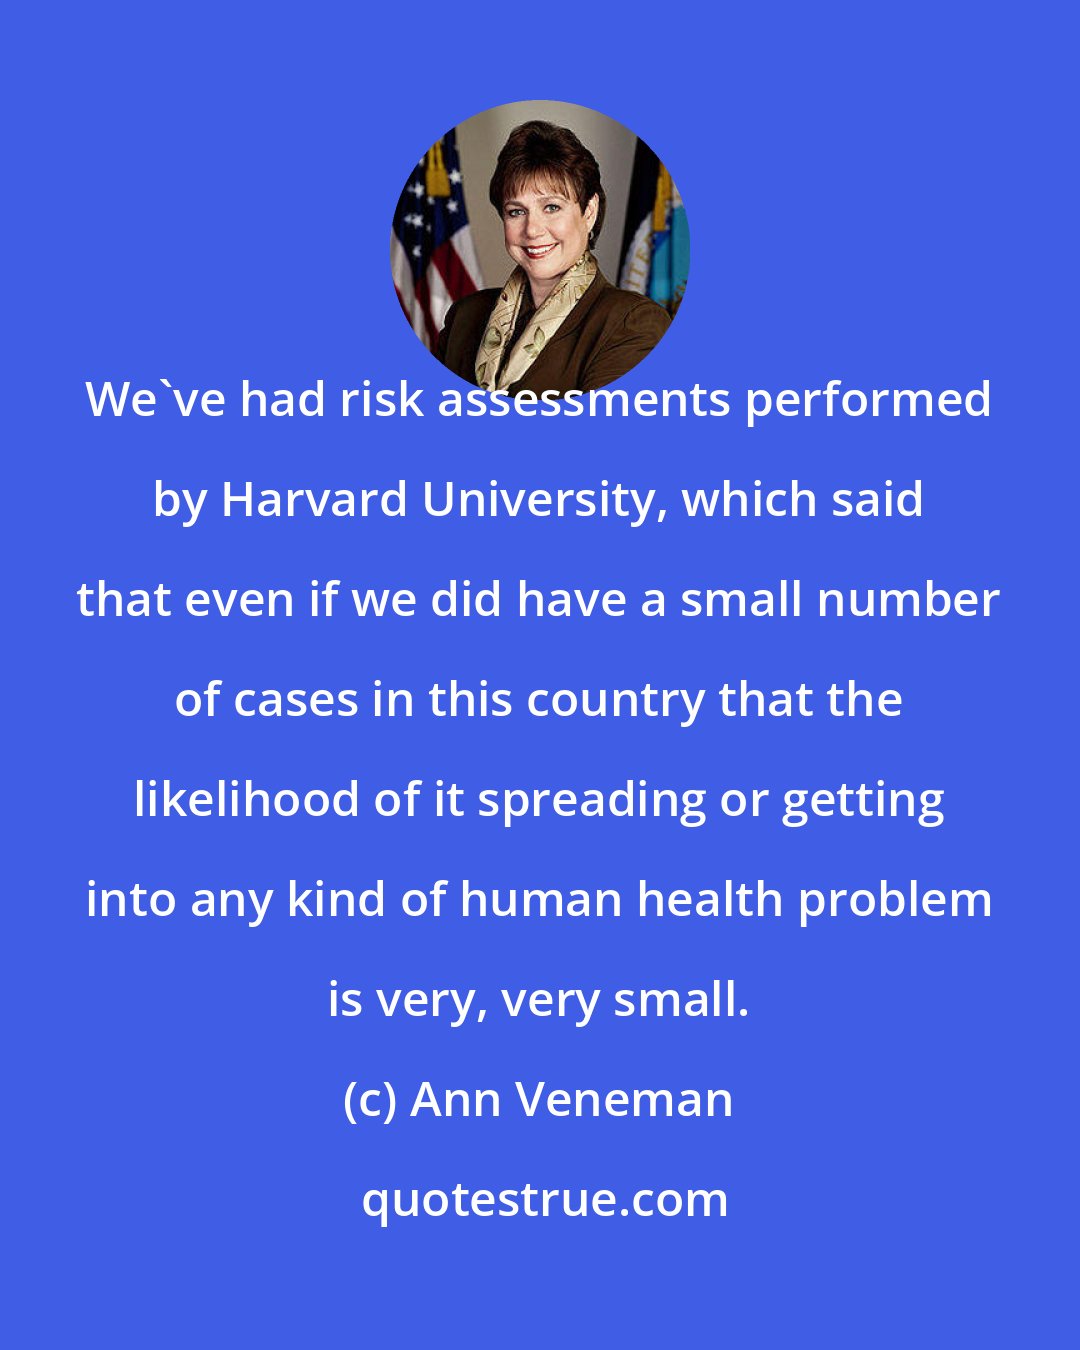 Ann Veneman: We've had risk assessments performed by Harvard University, which said that even if we did have a small number of cases in this country that the likelihood of it spreading or getting into any kind of human health problem is very, very small.